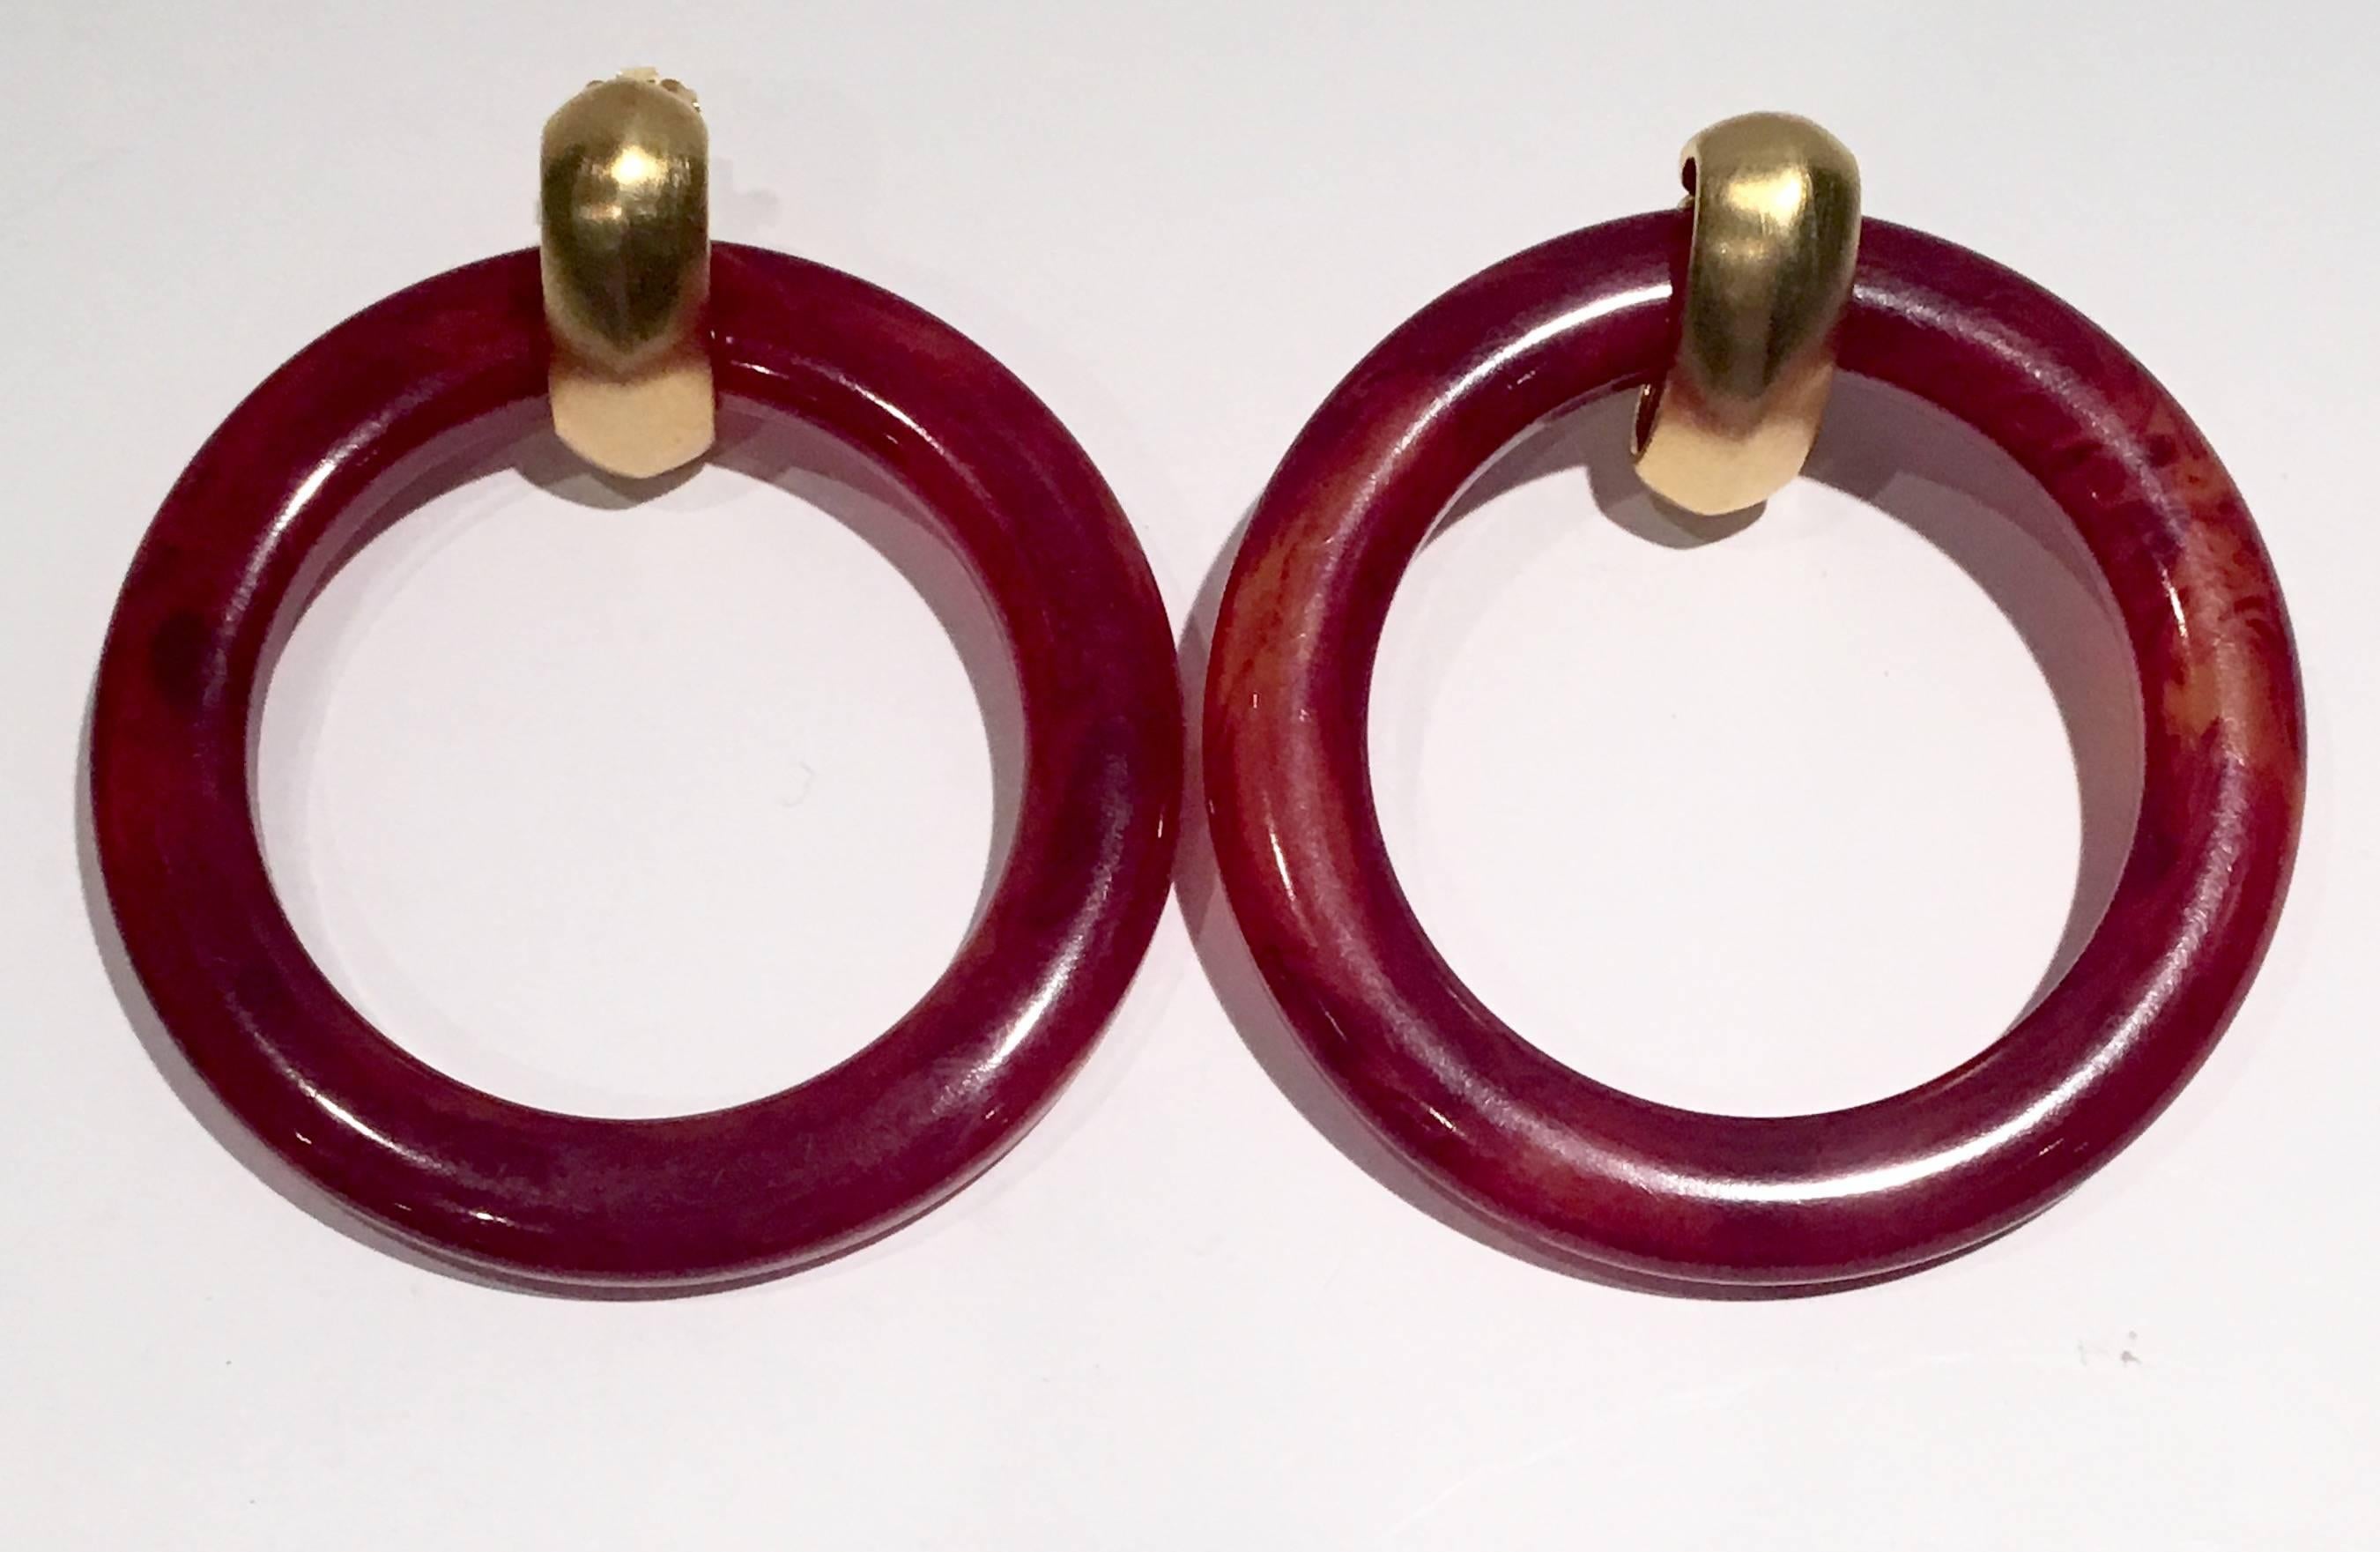 1960s Kenneth Jay Lane tortoise colored Bakelite large door knocker style hoop earrings with gold plate clip style posts. Made exclusively for Saks Fifth Avenue and signed Kenneth Lane.